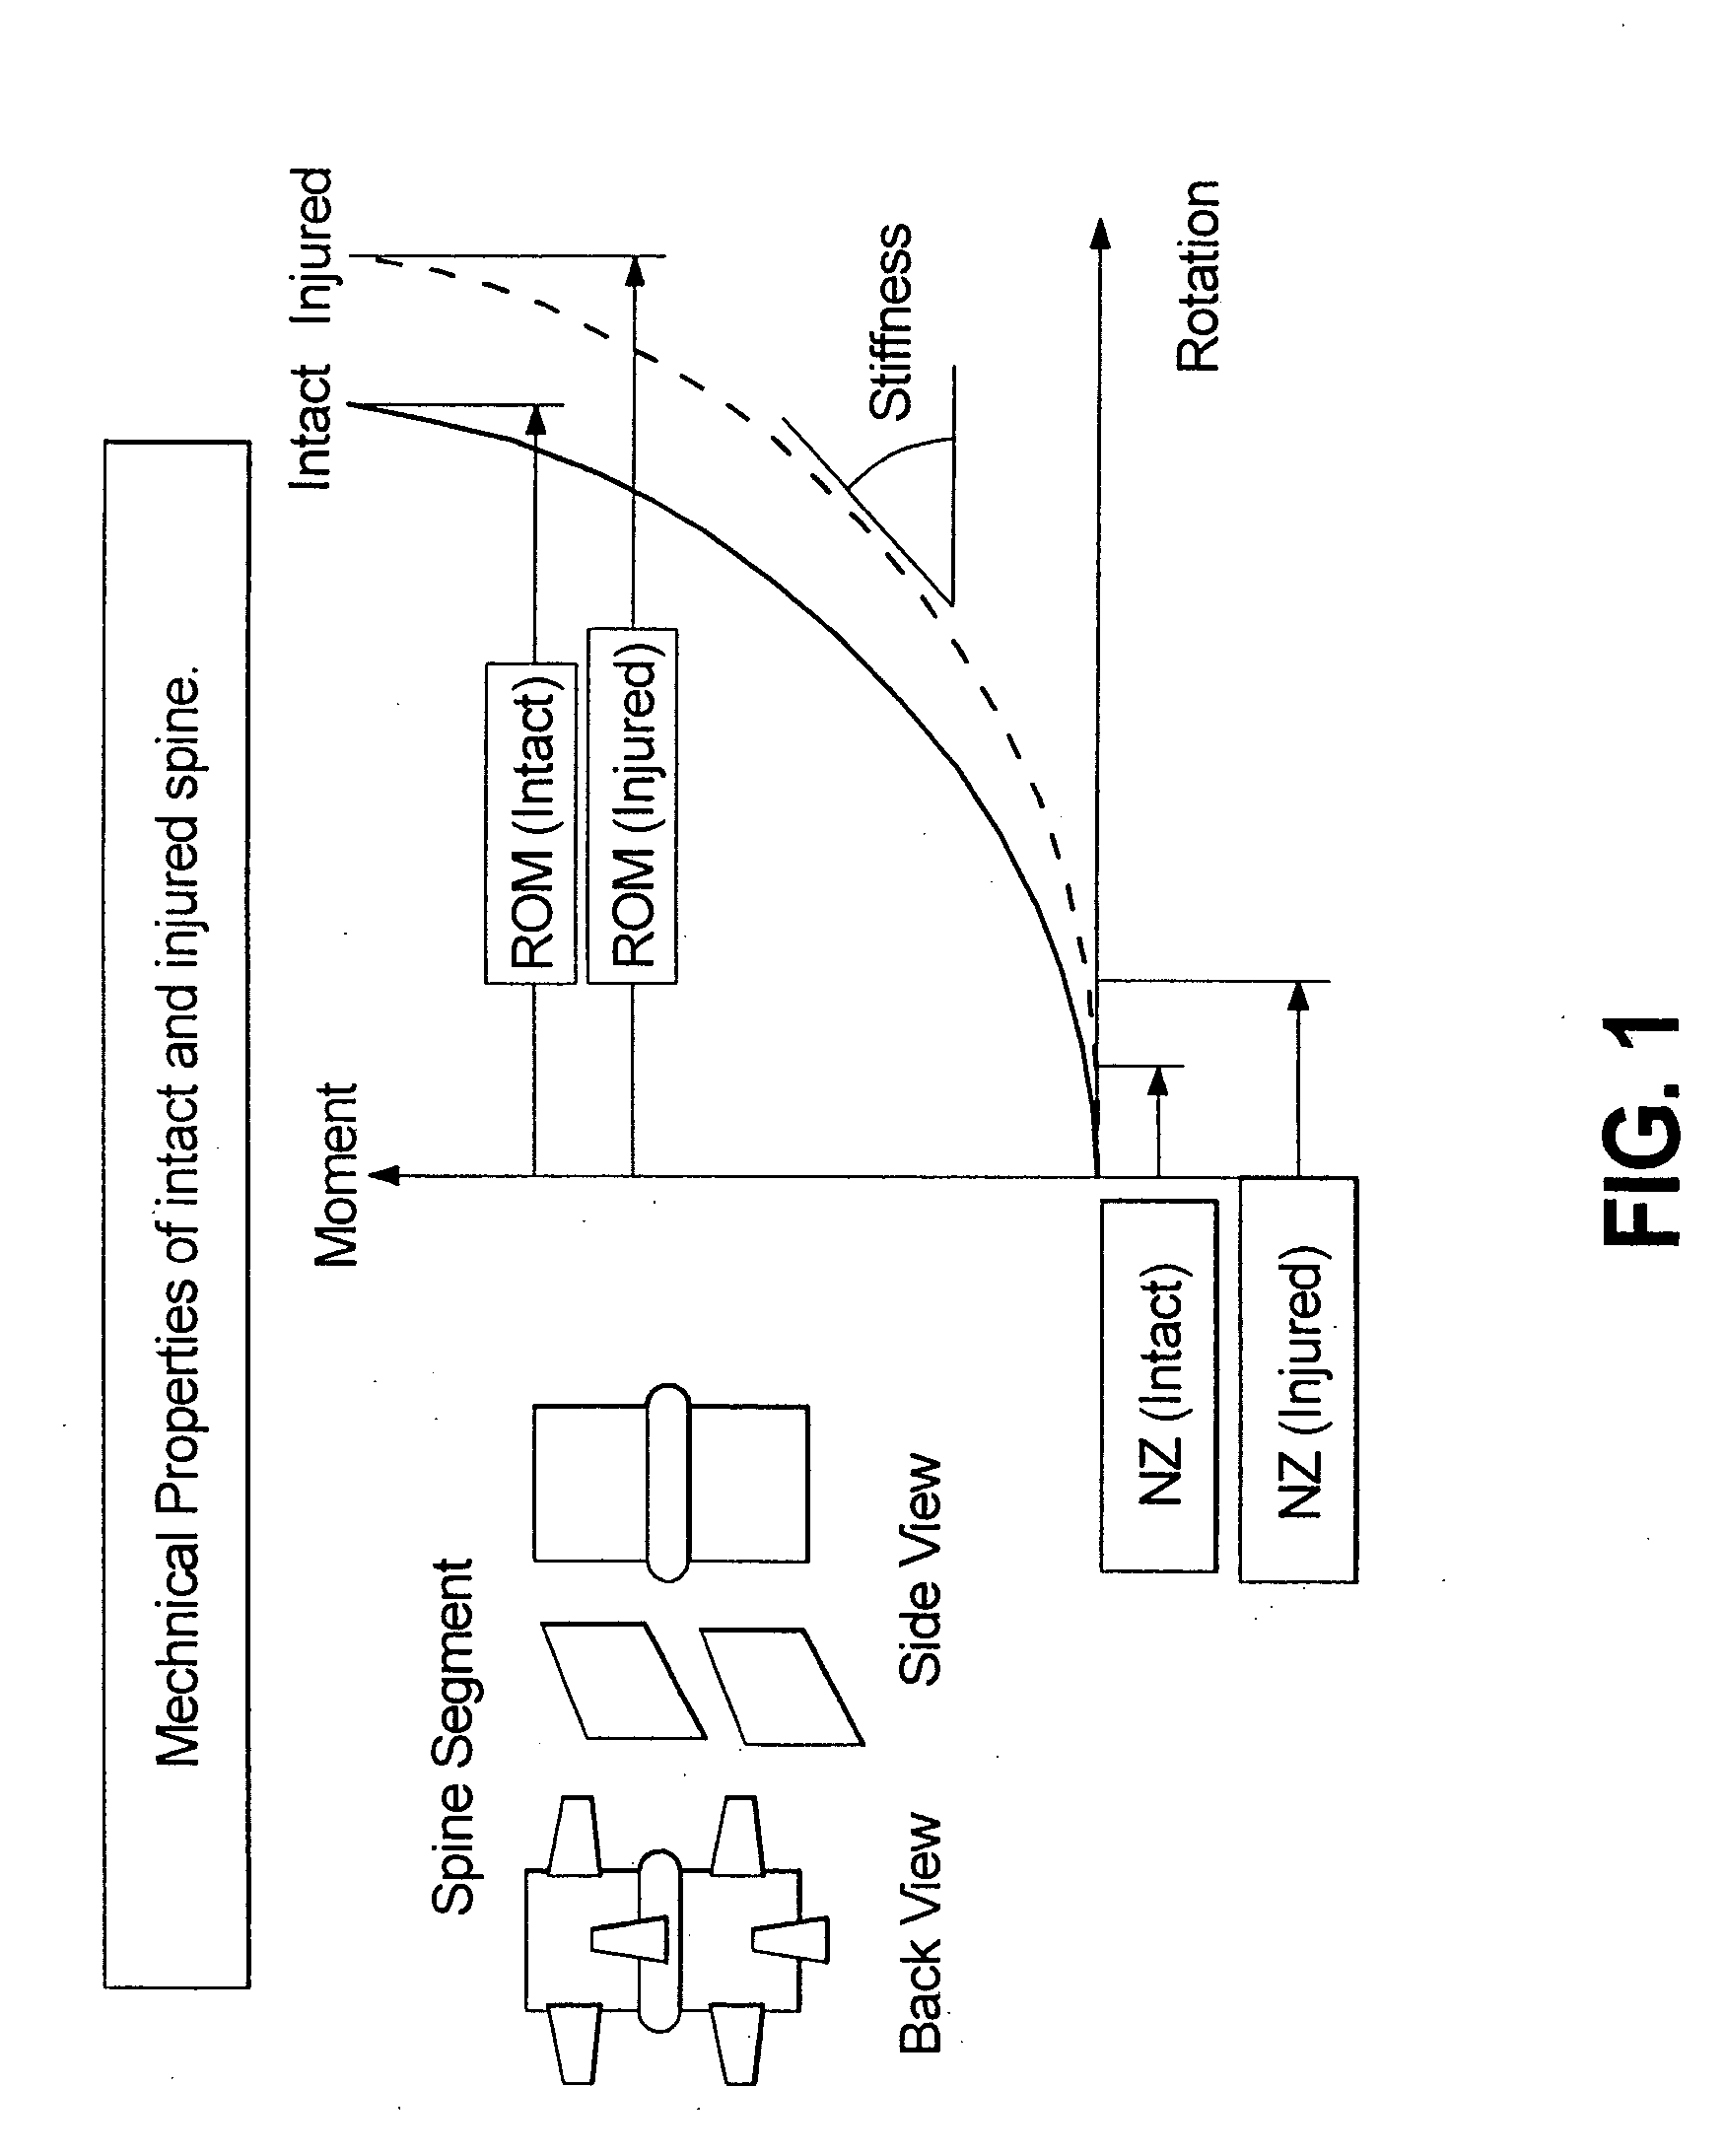 Surgical implant devices and systems including a sheath member